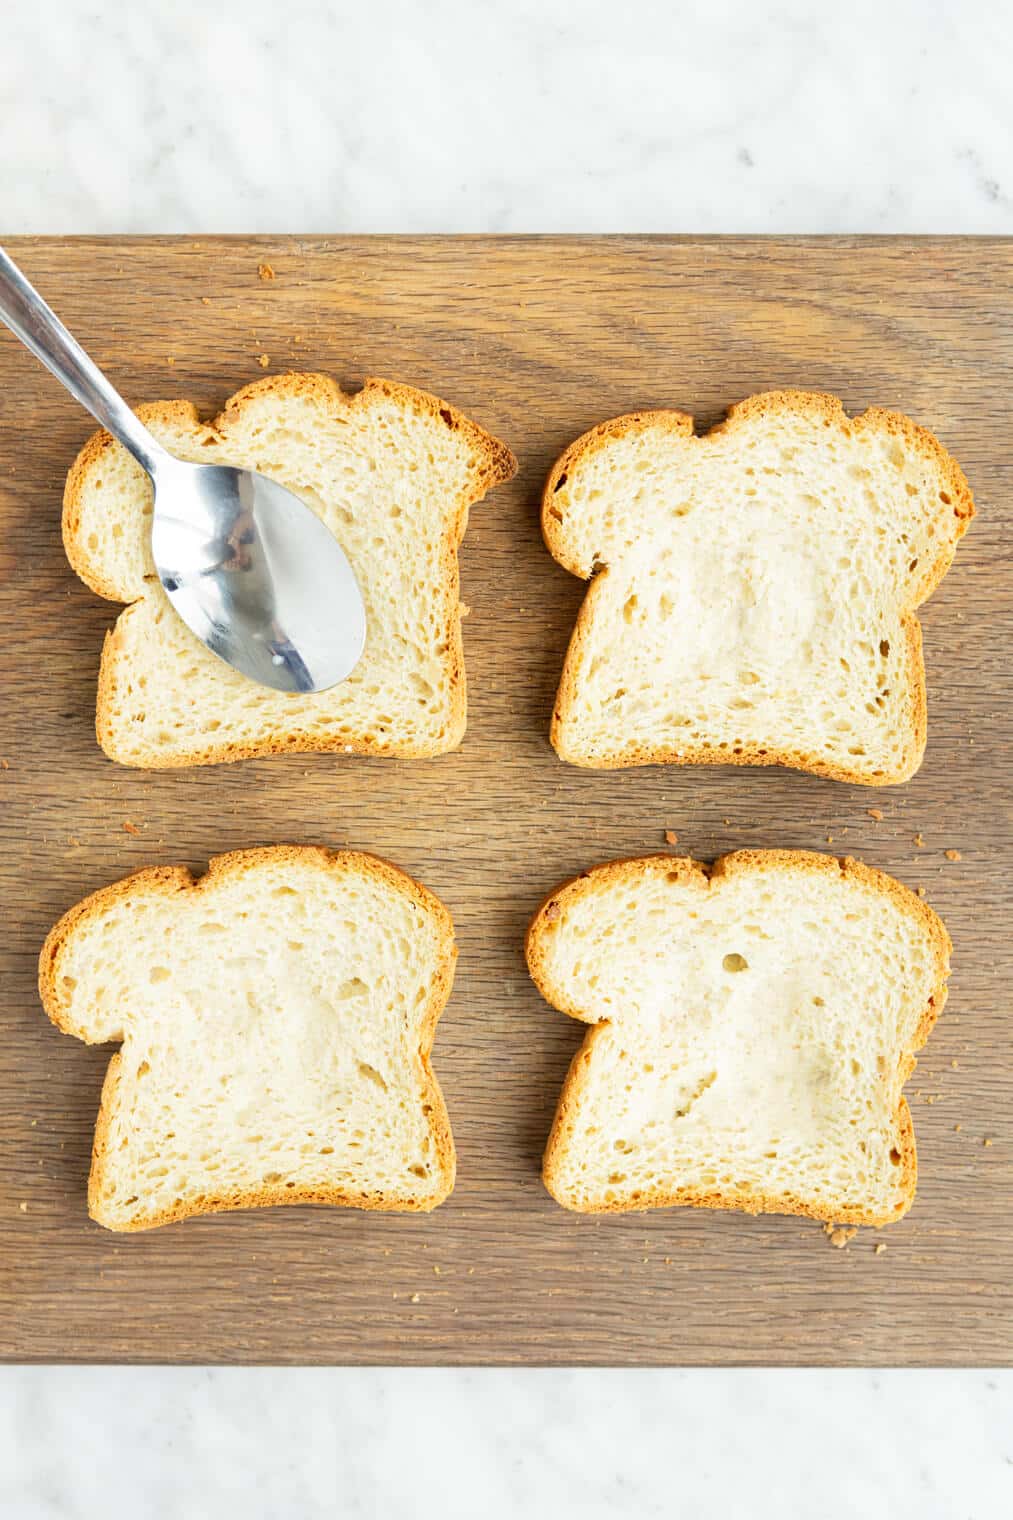 Spoon pressing down on a slice of bread sitting on a wooden cutting board with 4 other pieces of bread.